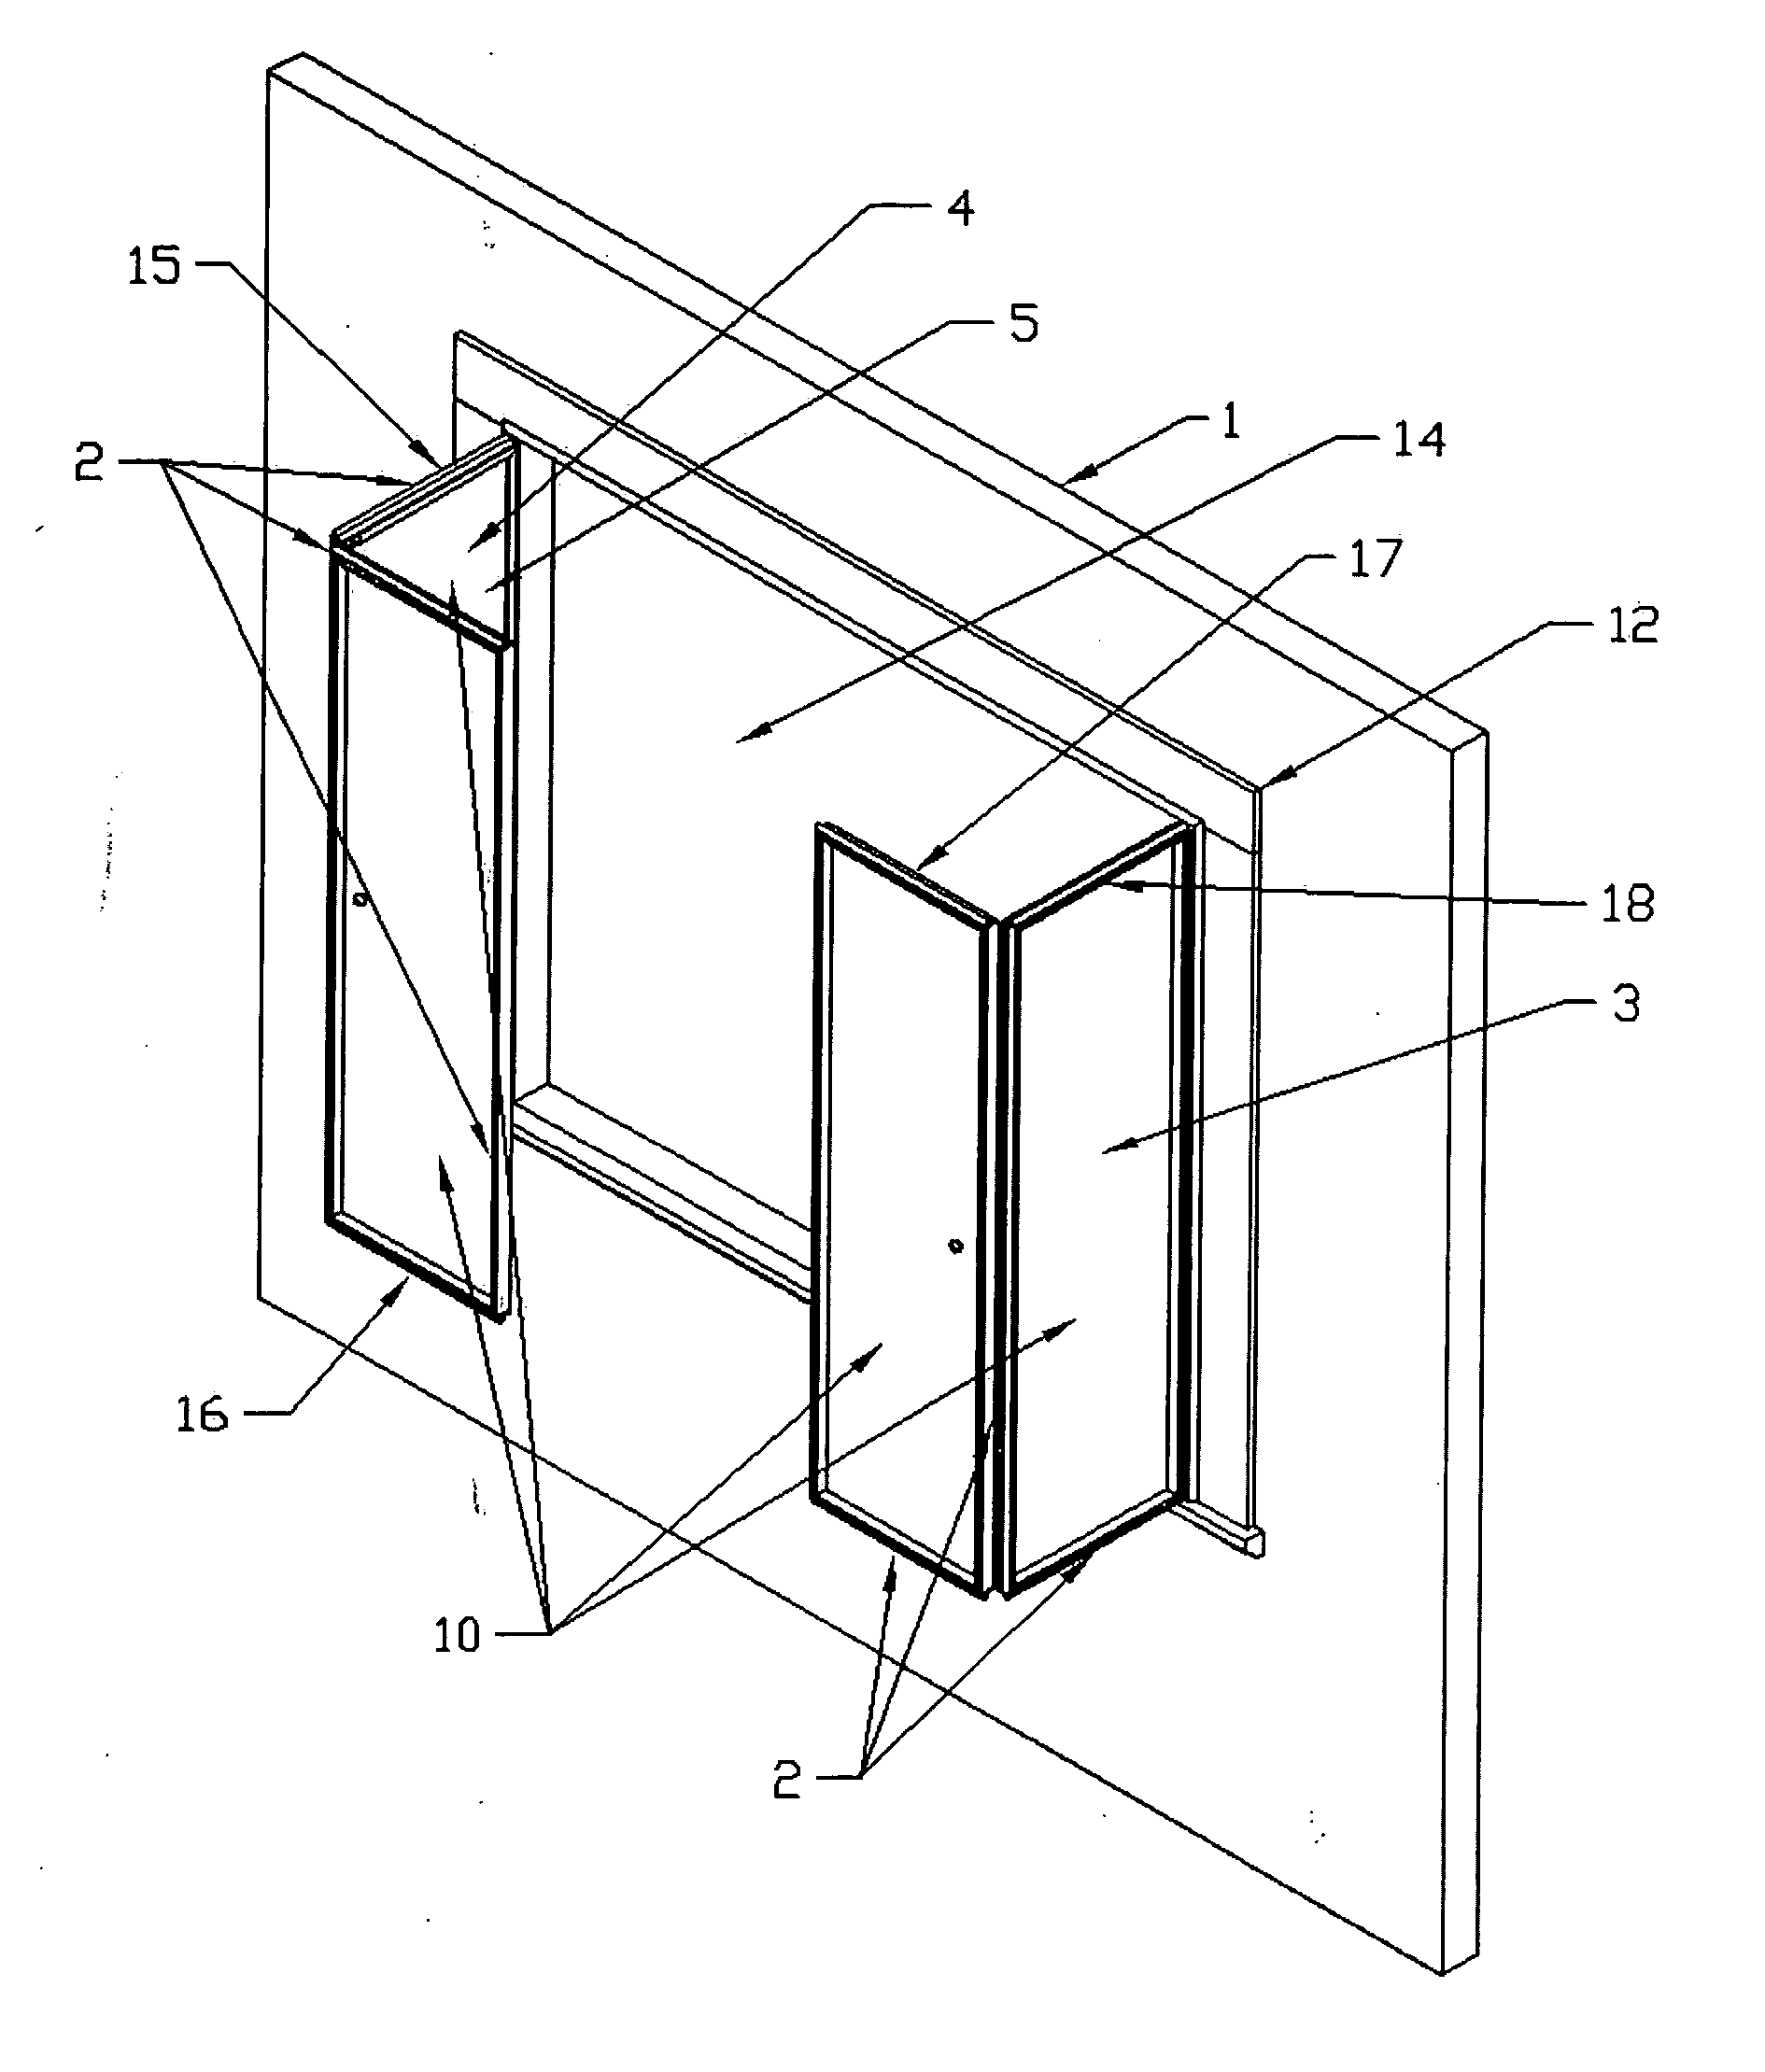 Acoustical window and door covering